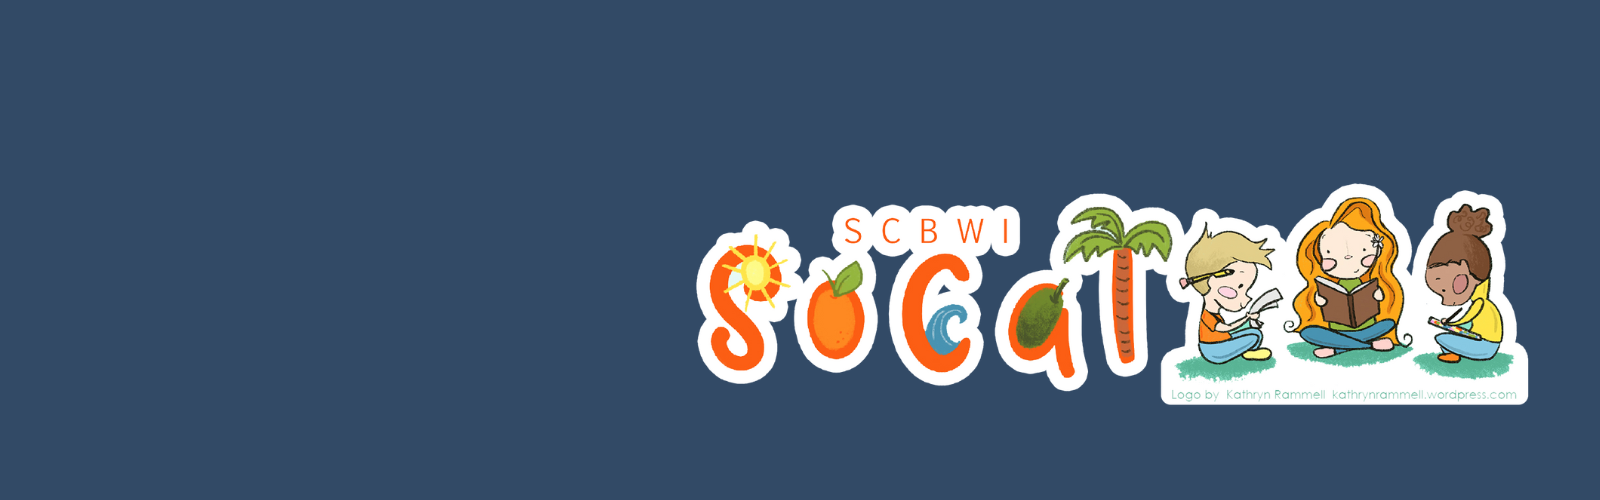 SoCal logo banner USE THIS ONE- FULL SCREEN.png